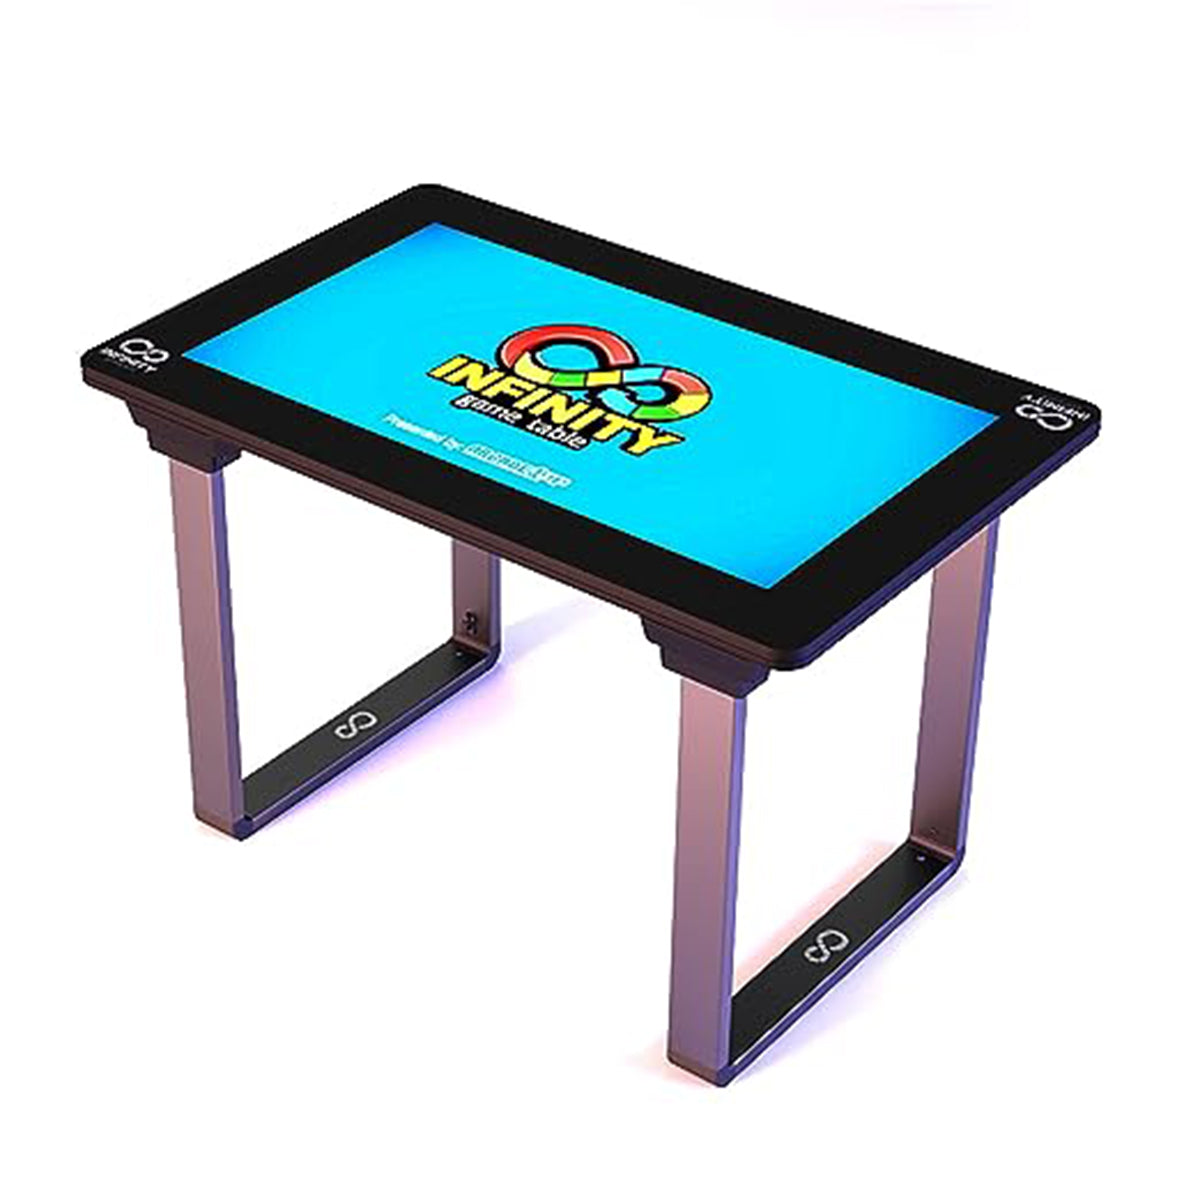 Arcade1Up 32" Screen Infinity Game Table - Electronic Games